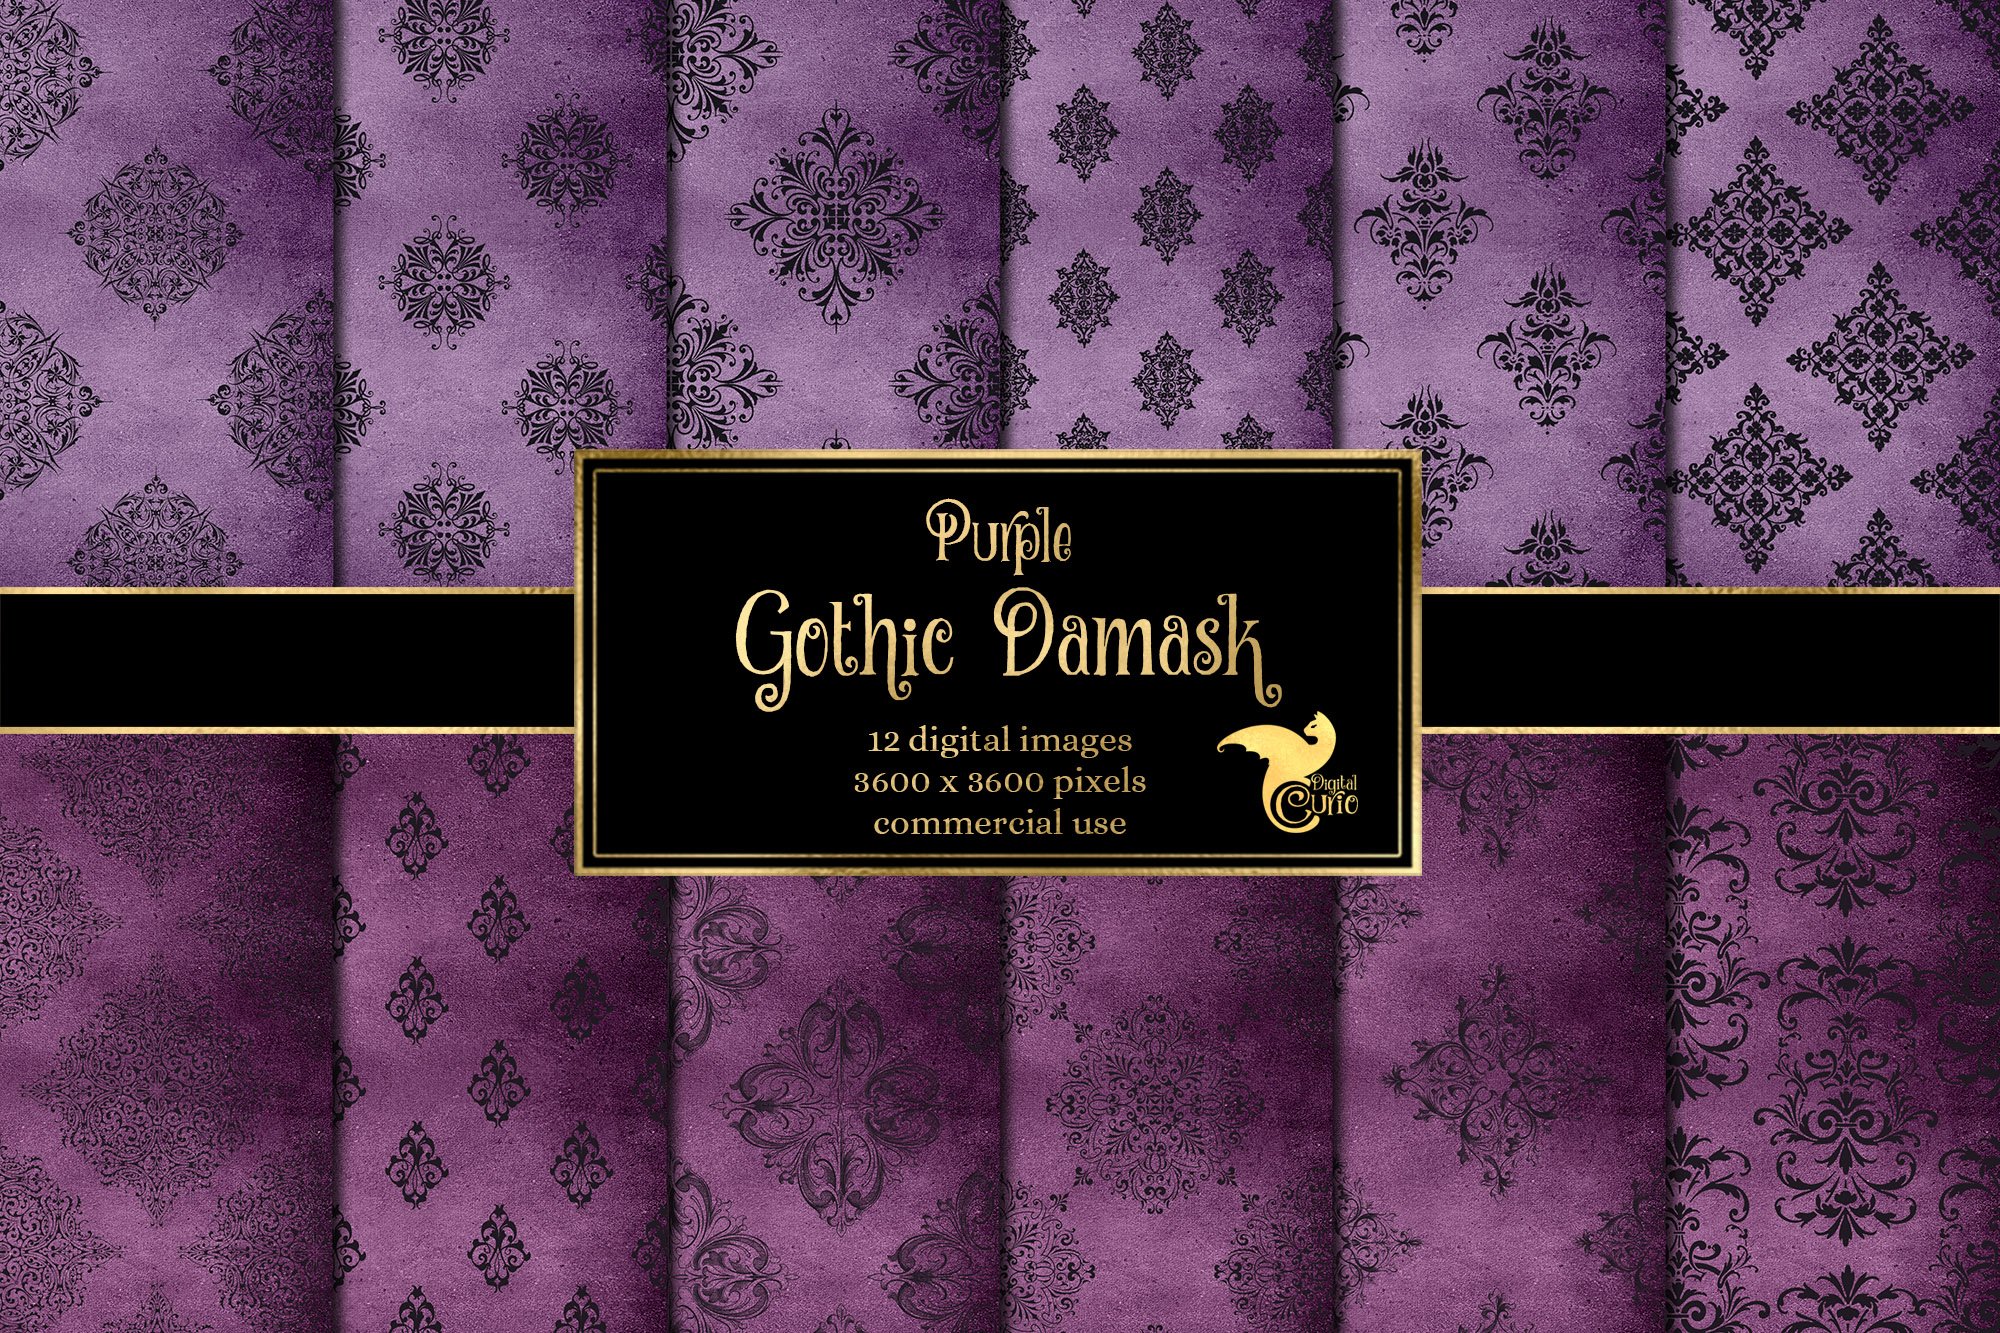 Purple Gothic Damask Digital Paper cover image.